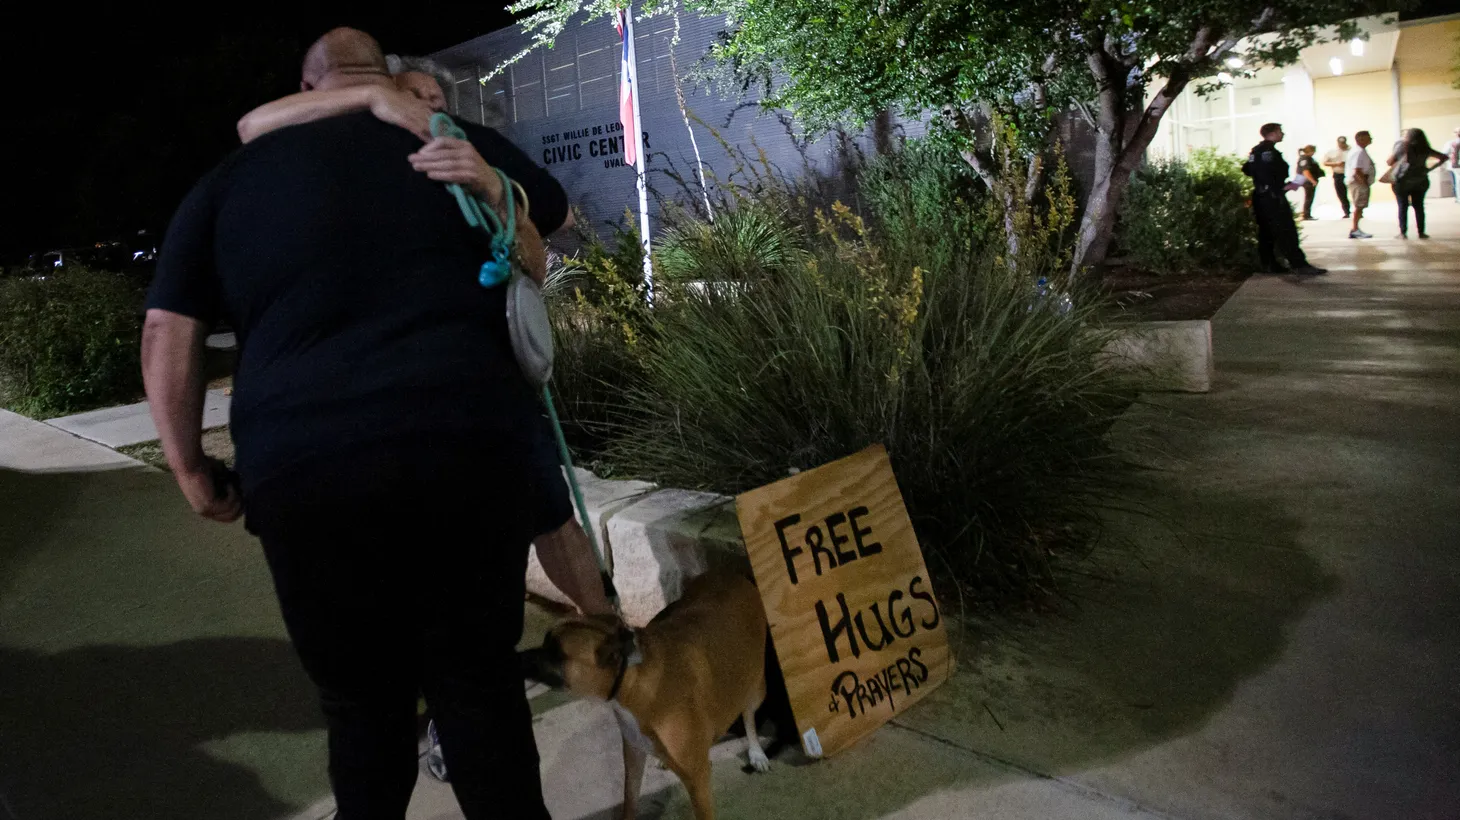 Jennifer Click of Bandera, Texas, offers hugs to people as they leave the Civic Center after a mass shooting at Robb Elementary School in Uvalde, Texas, U.S., May 24, 2022.